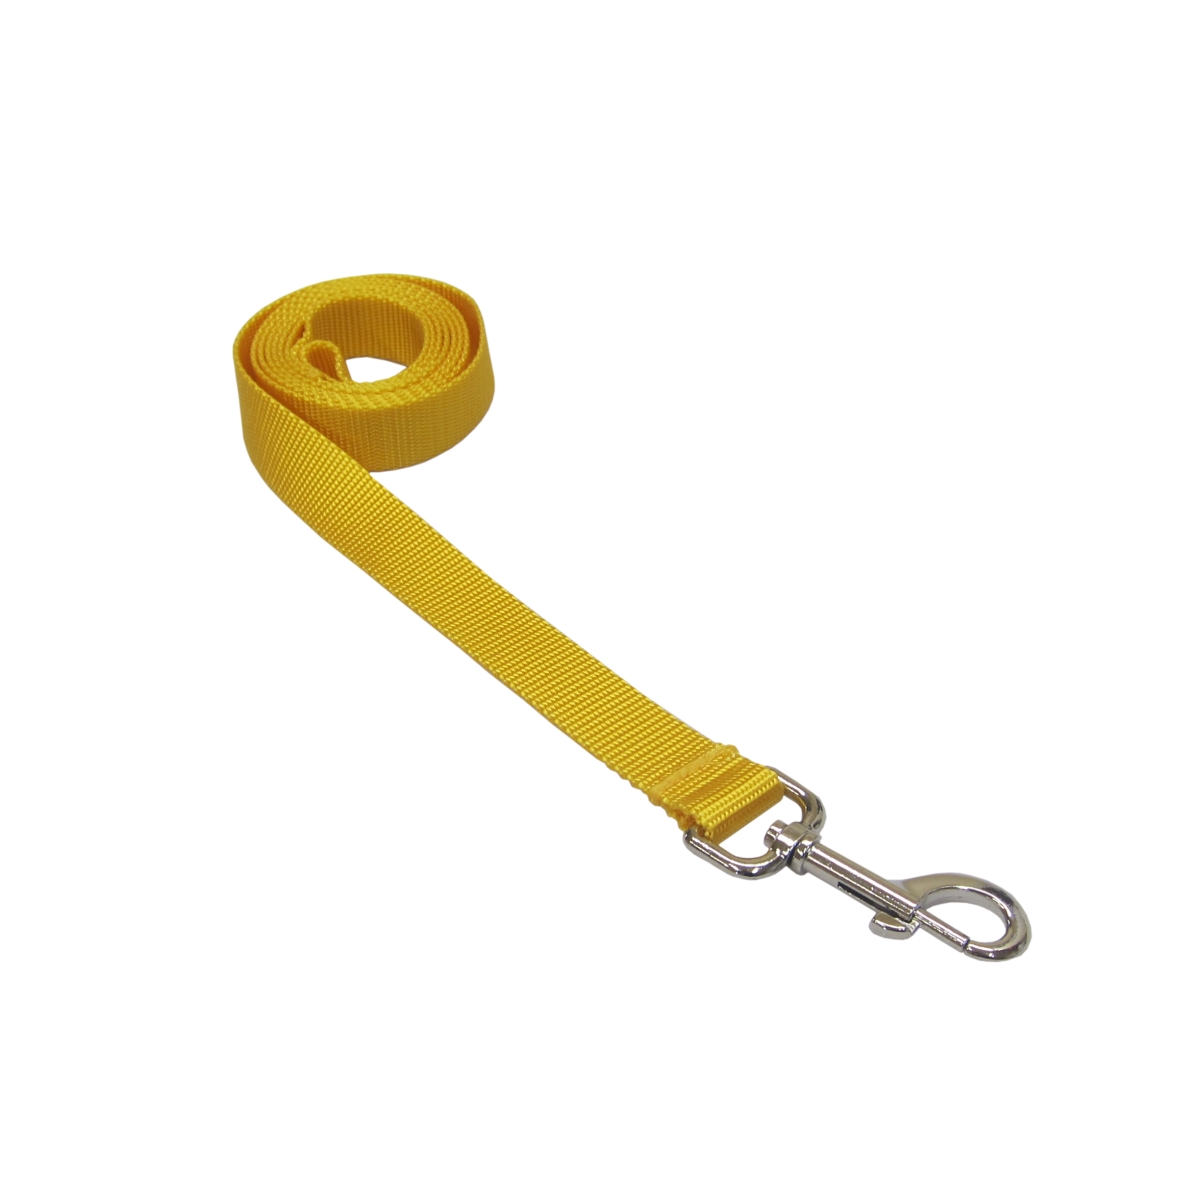 Picture of Sassy Dog Wear SOLID YELLOW XS-L Nylon Webbing Dog Leash - Extra Small - Yellow